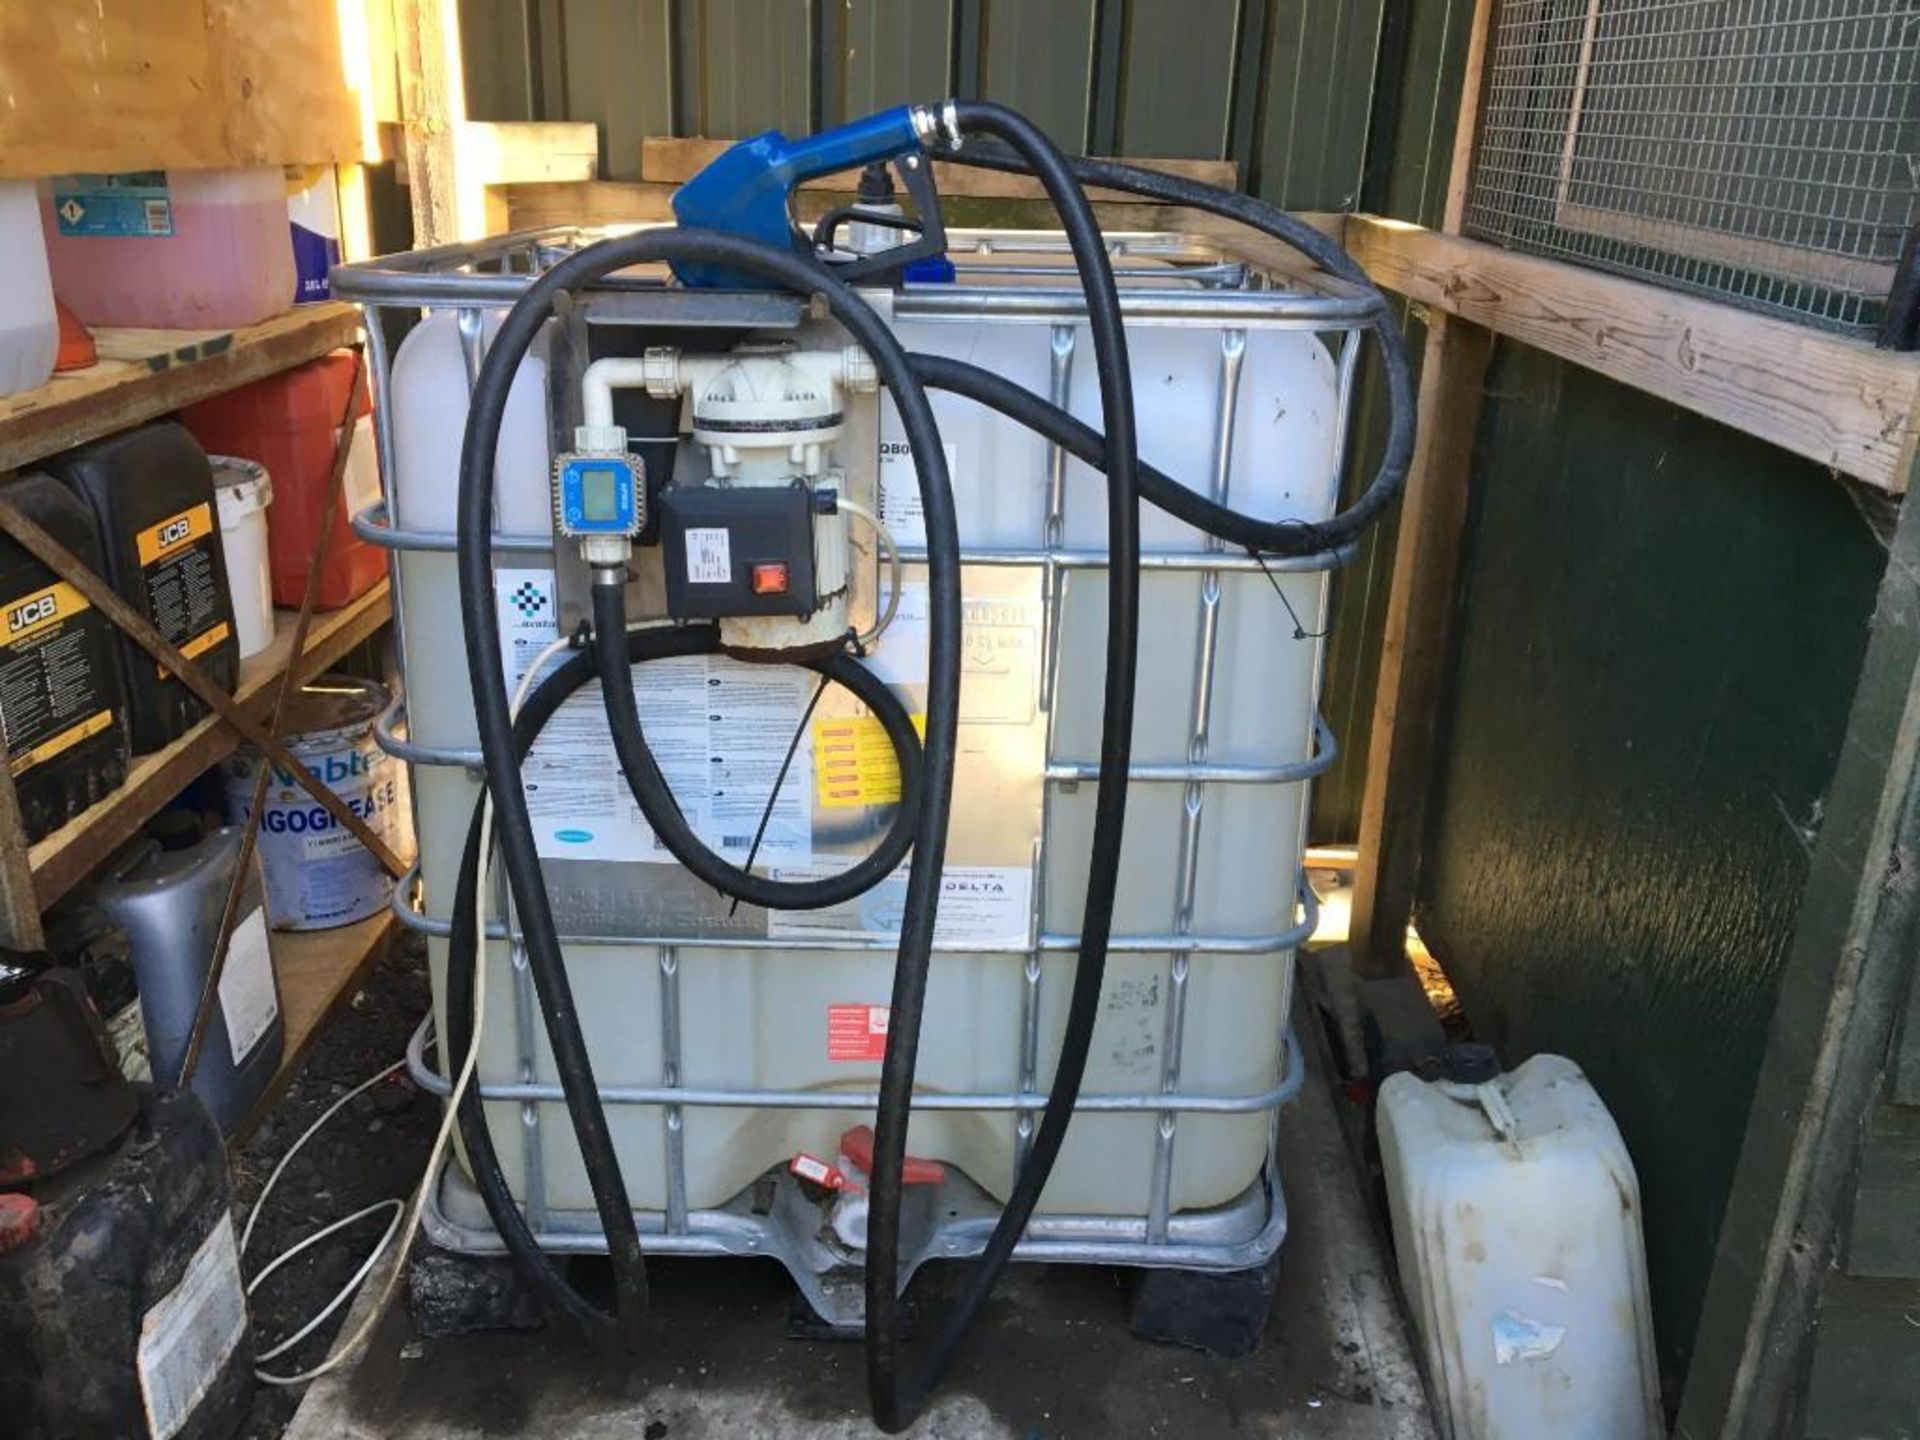 IBC c/w approximately 850 litres of AdBlue with electric pump dispensor